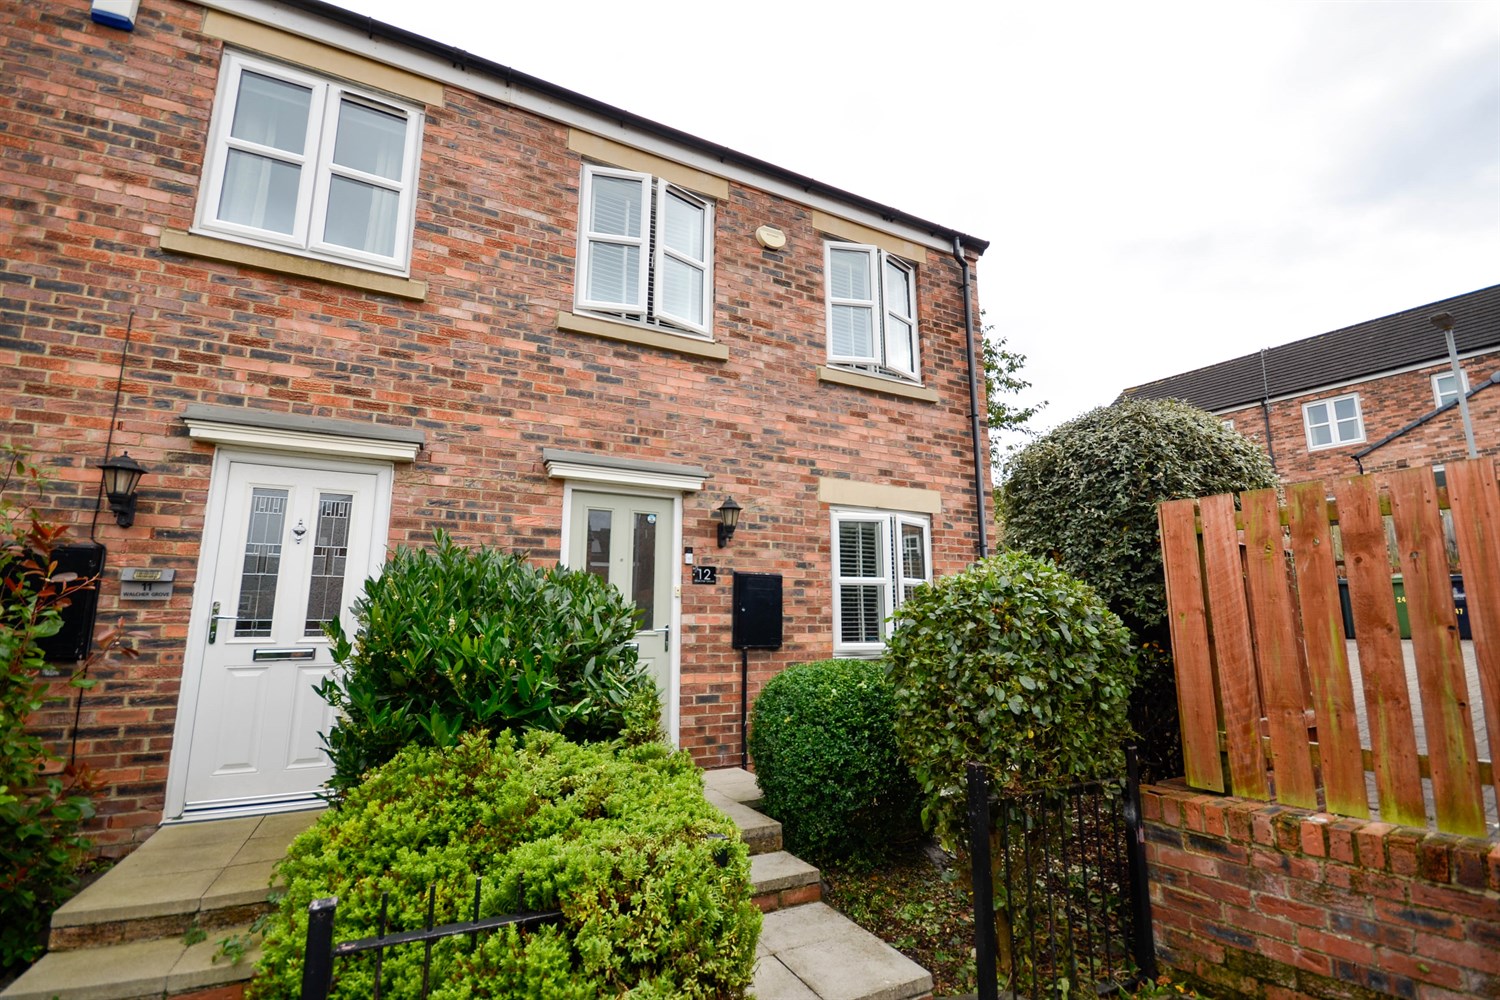 2 bed semi-detached house for sale in Walcher Grove, Gateshead - Property Image 1